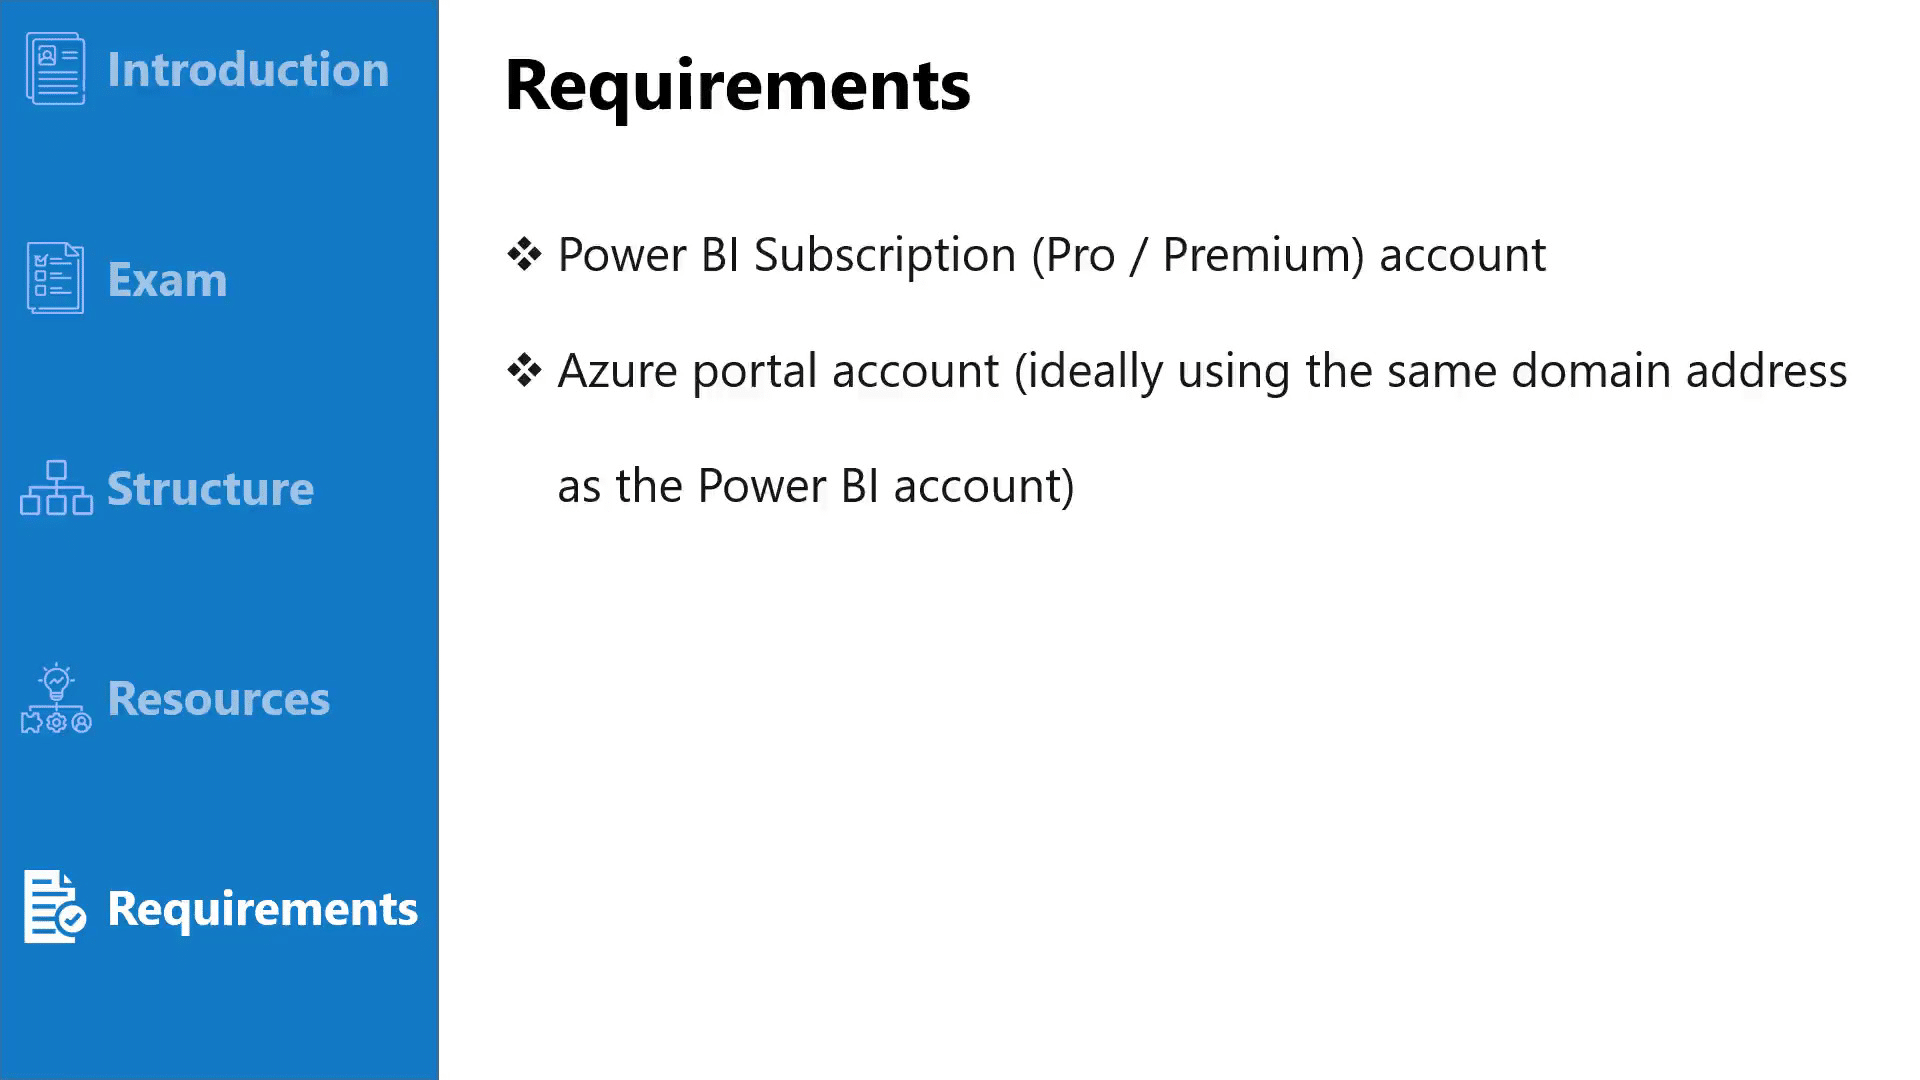 Requirements for Microsoft DP-500 exam